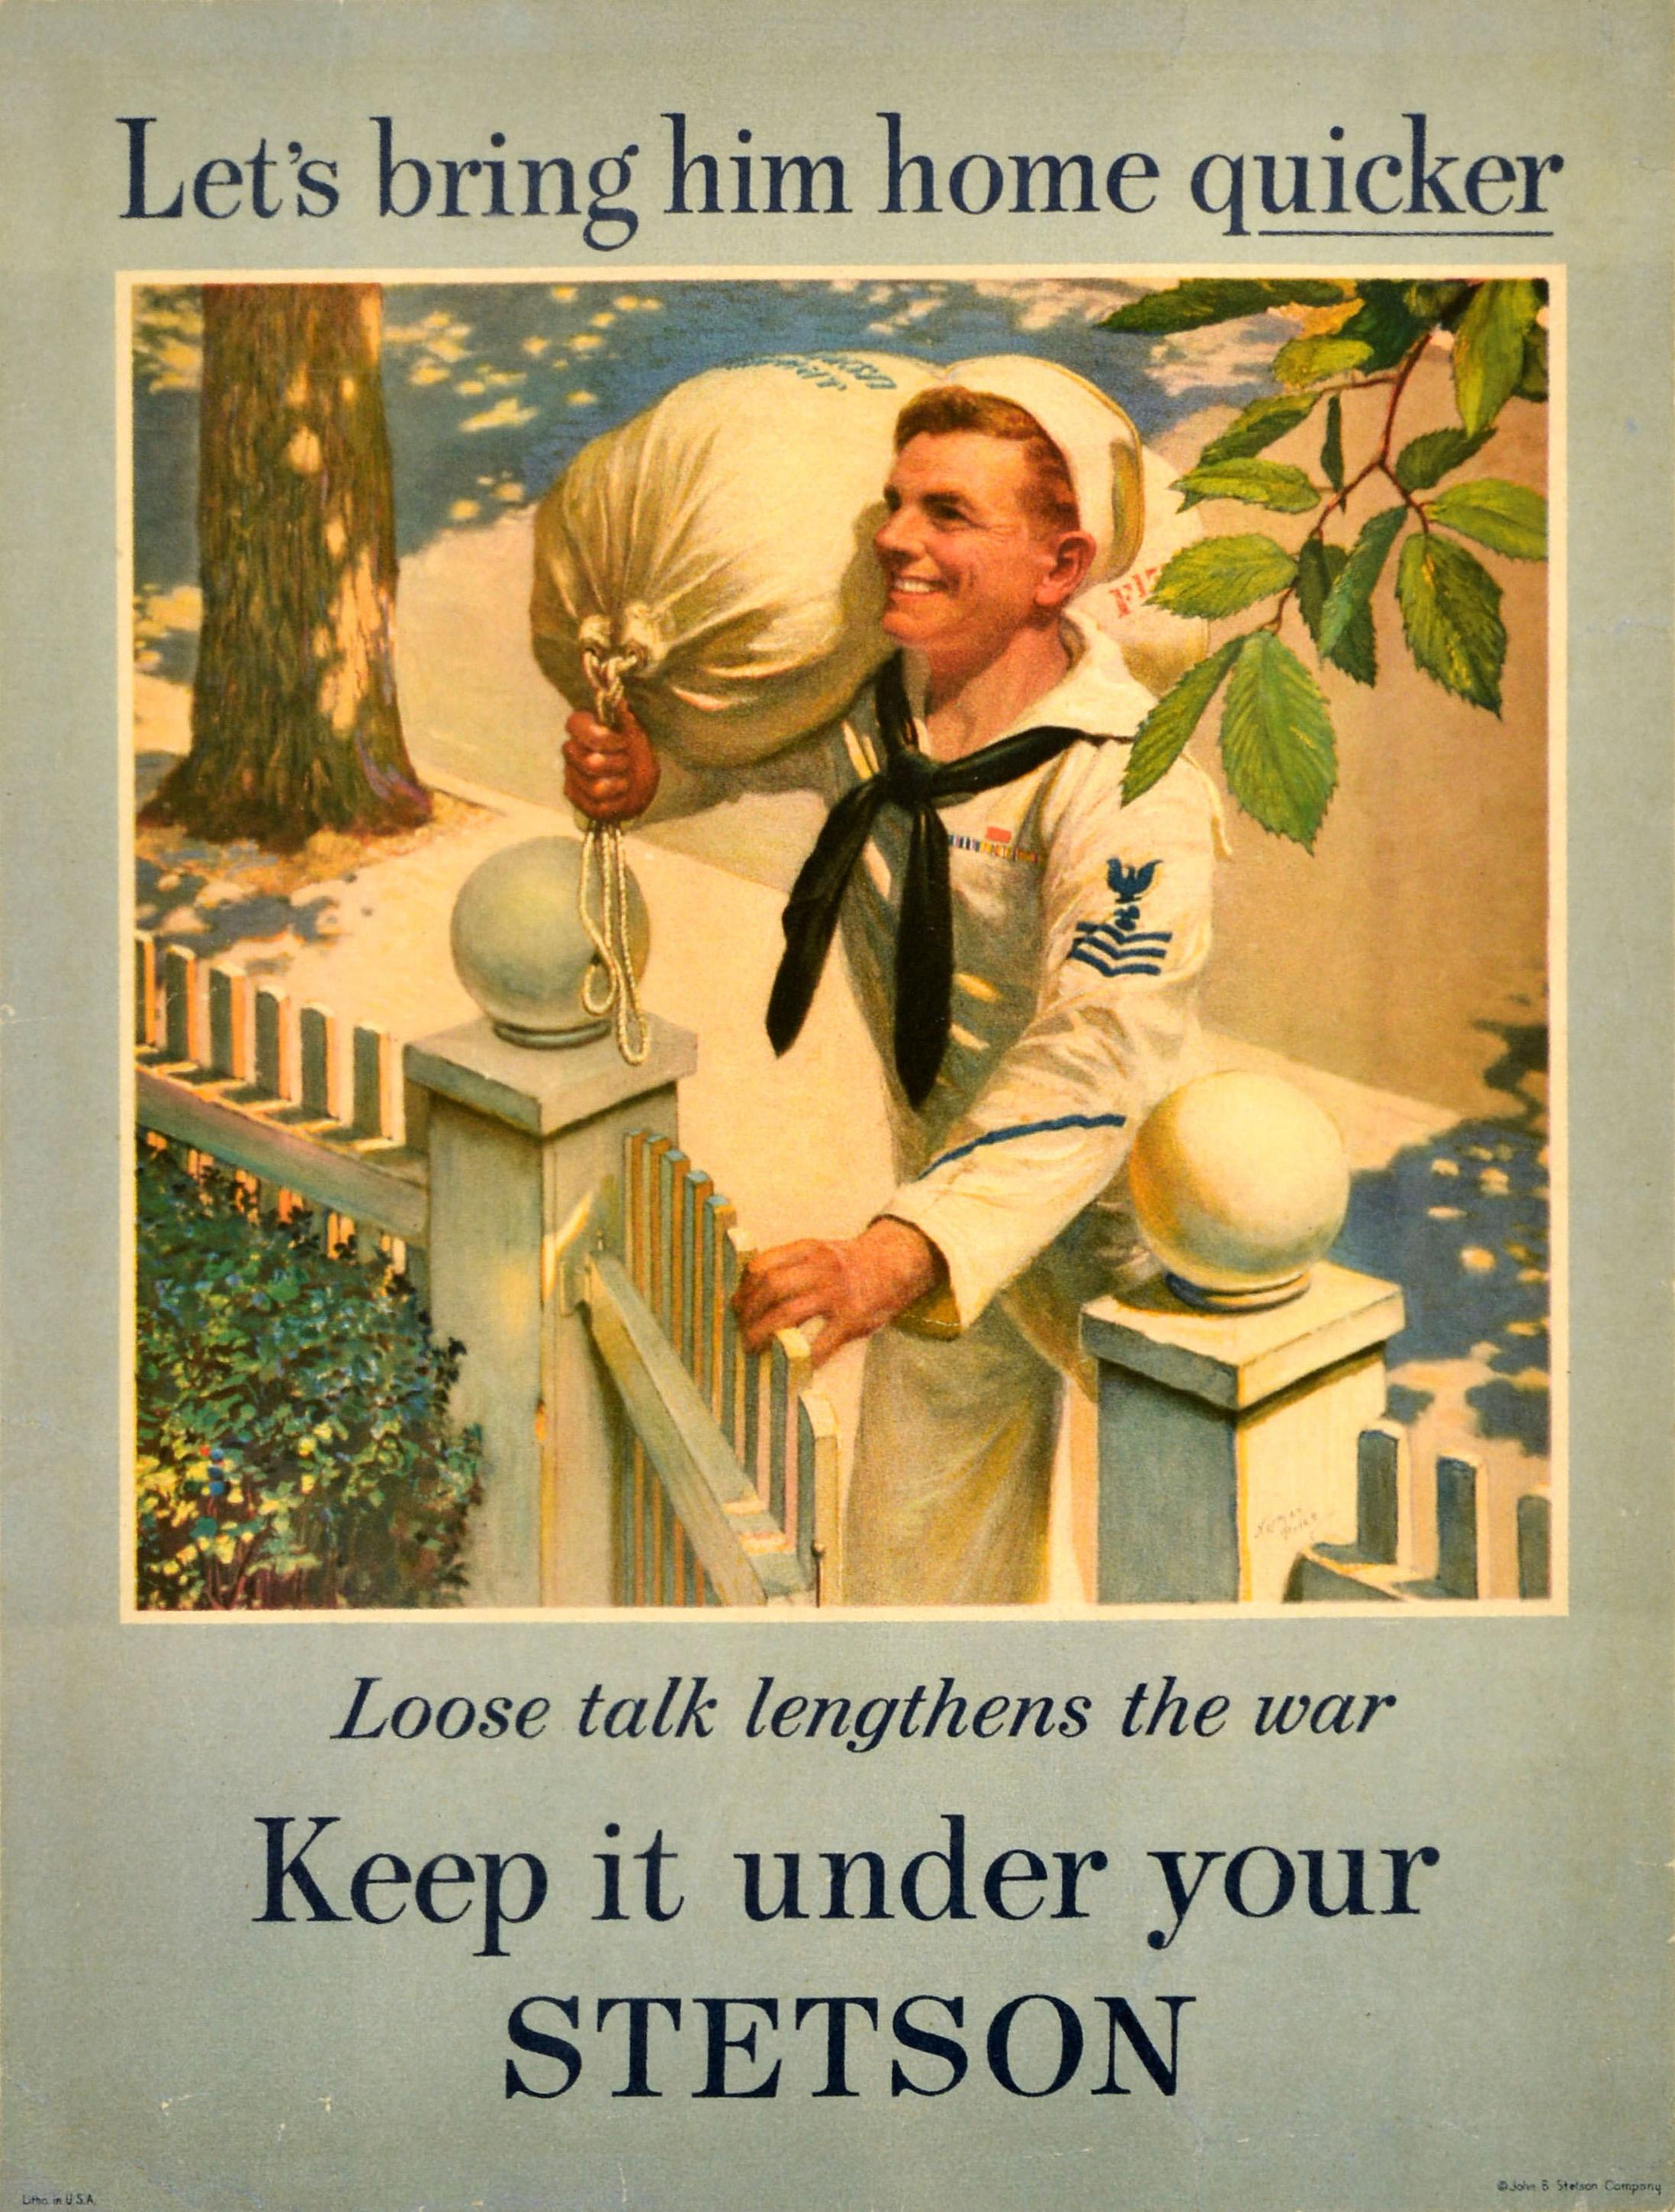 Unknown Print - Original Vintage Advertising Poster Keep It Under Your Stetson Bring Him Home